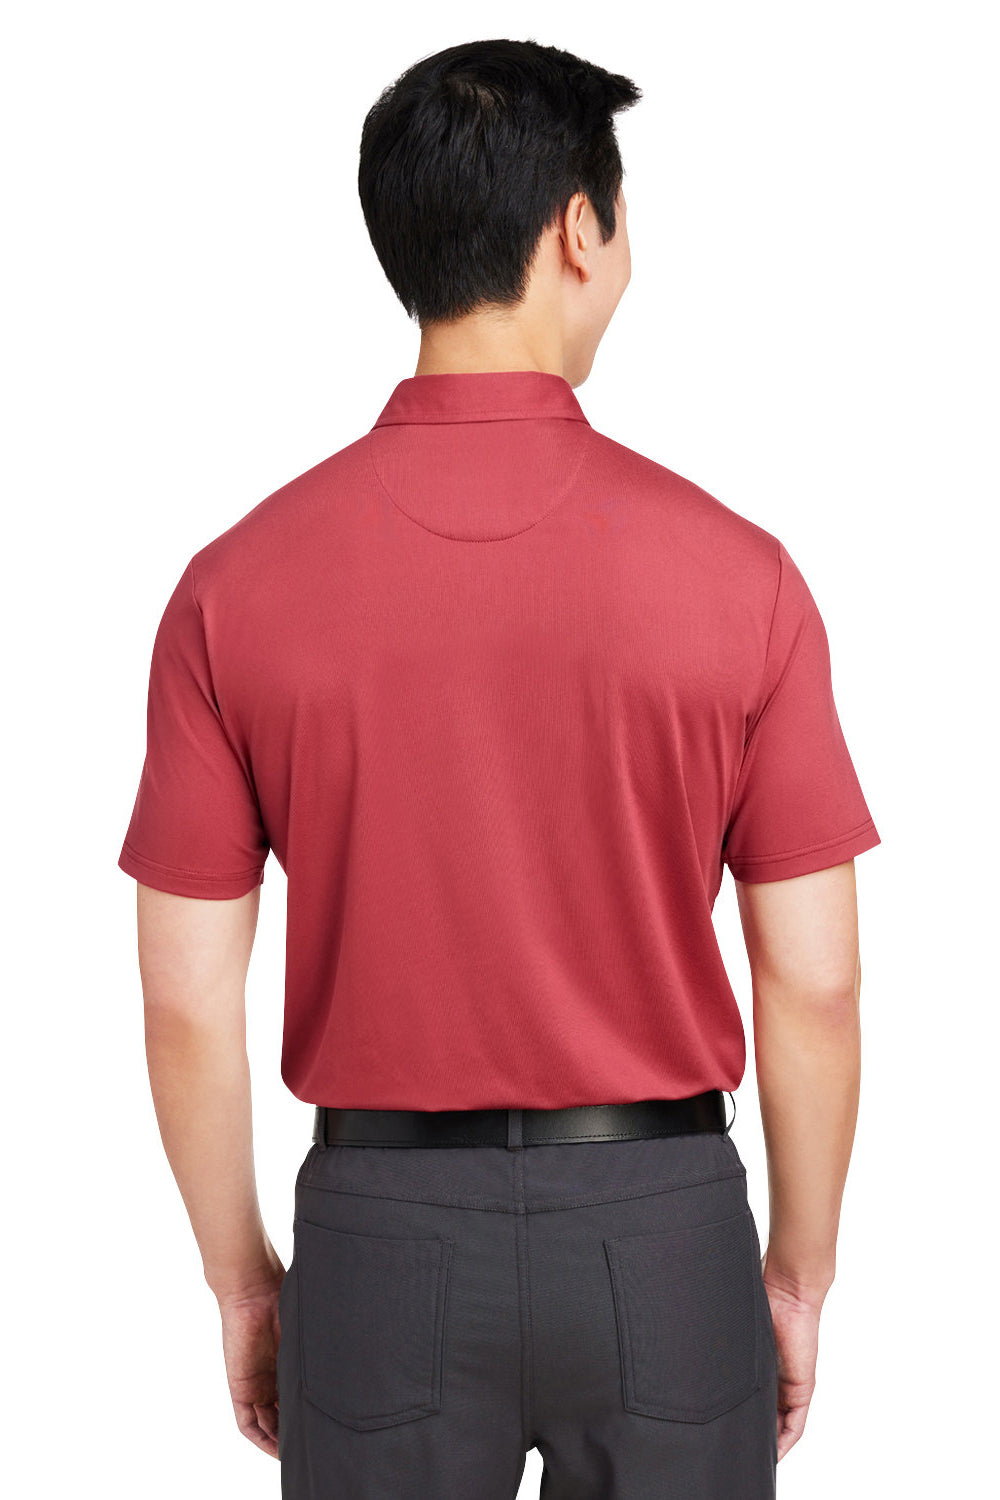 Swannies Golf SW2000 Mens James Short Sleeve Polo Shirt Heather Red Back